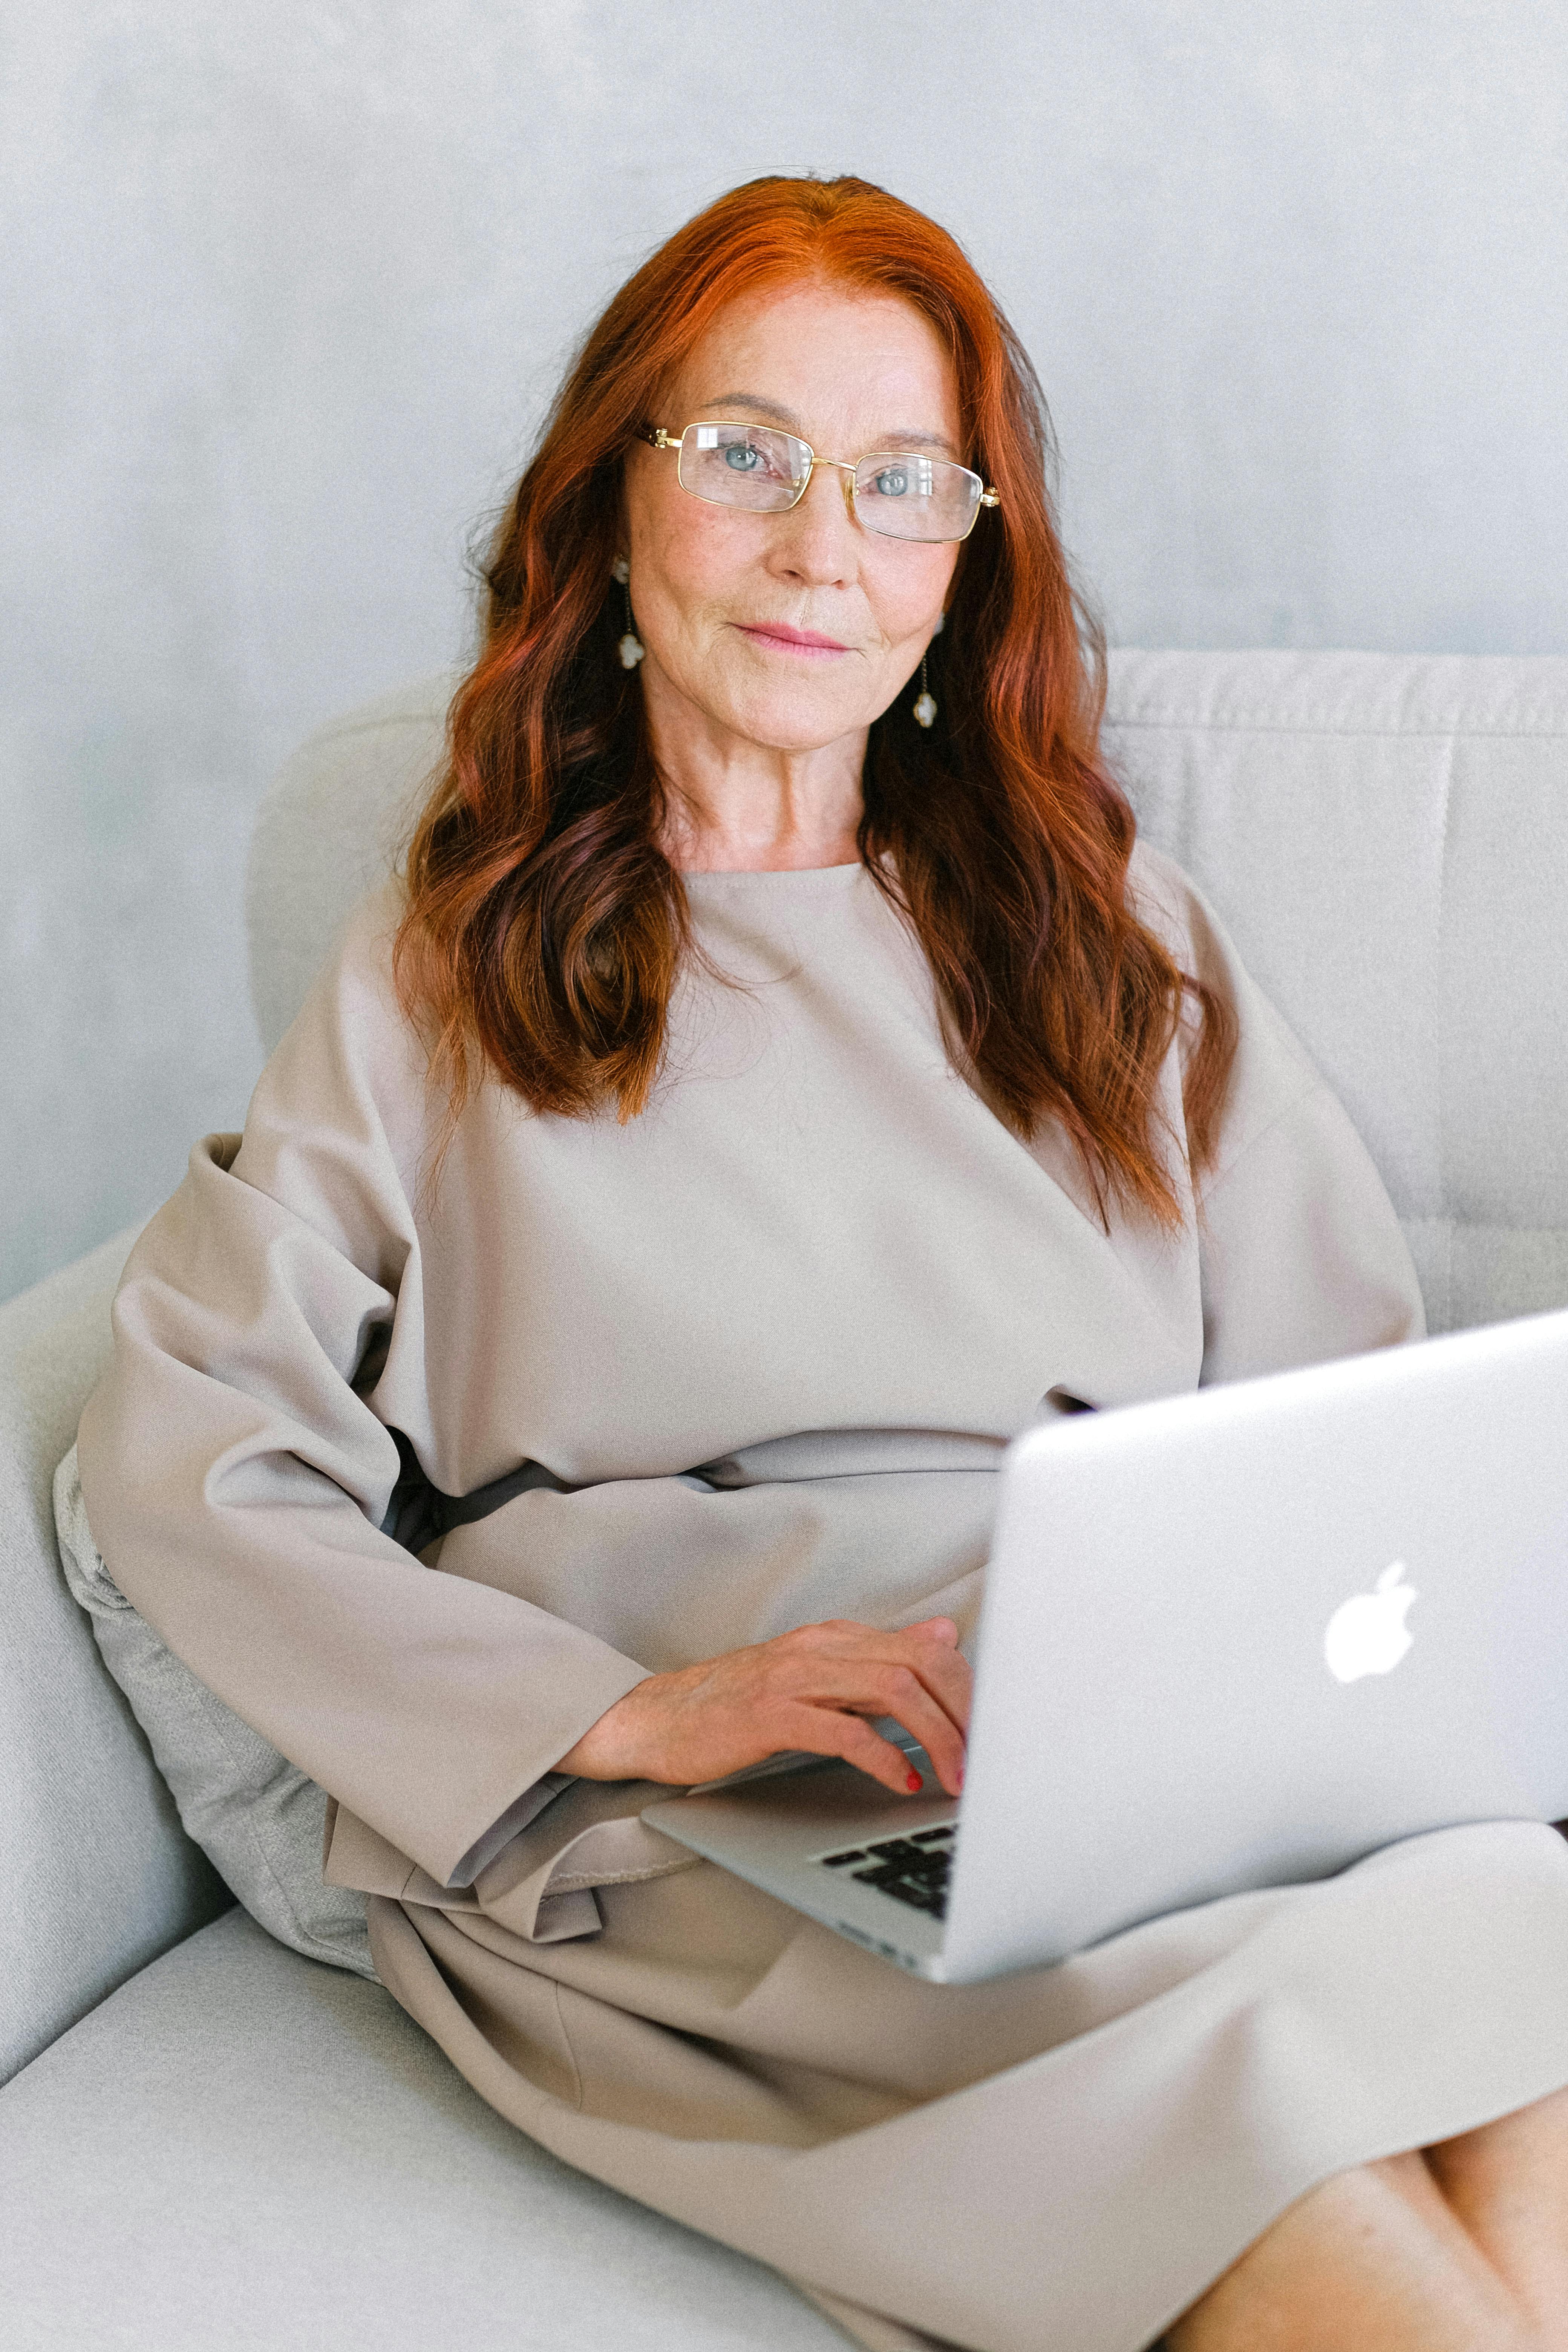 Elderly lady with a laptop | Source: Pexels